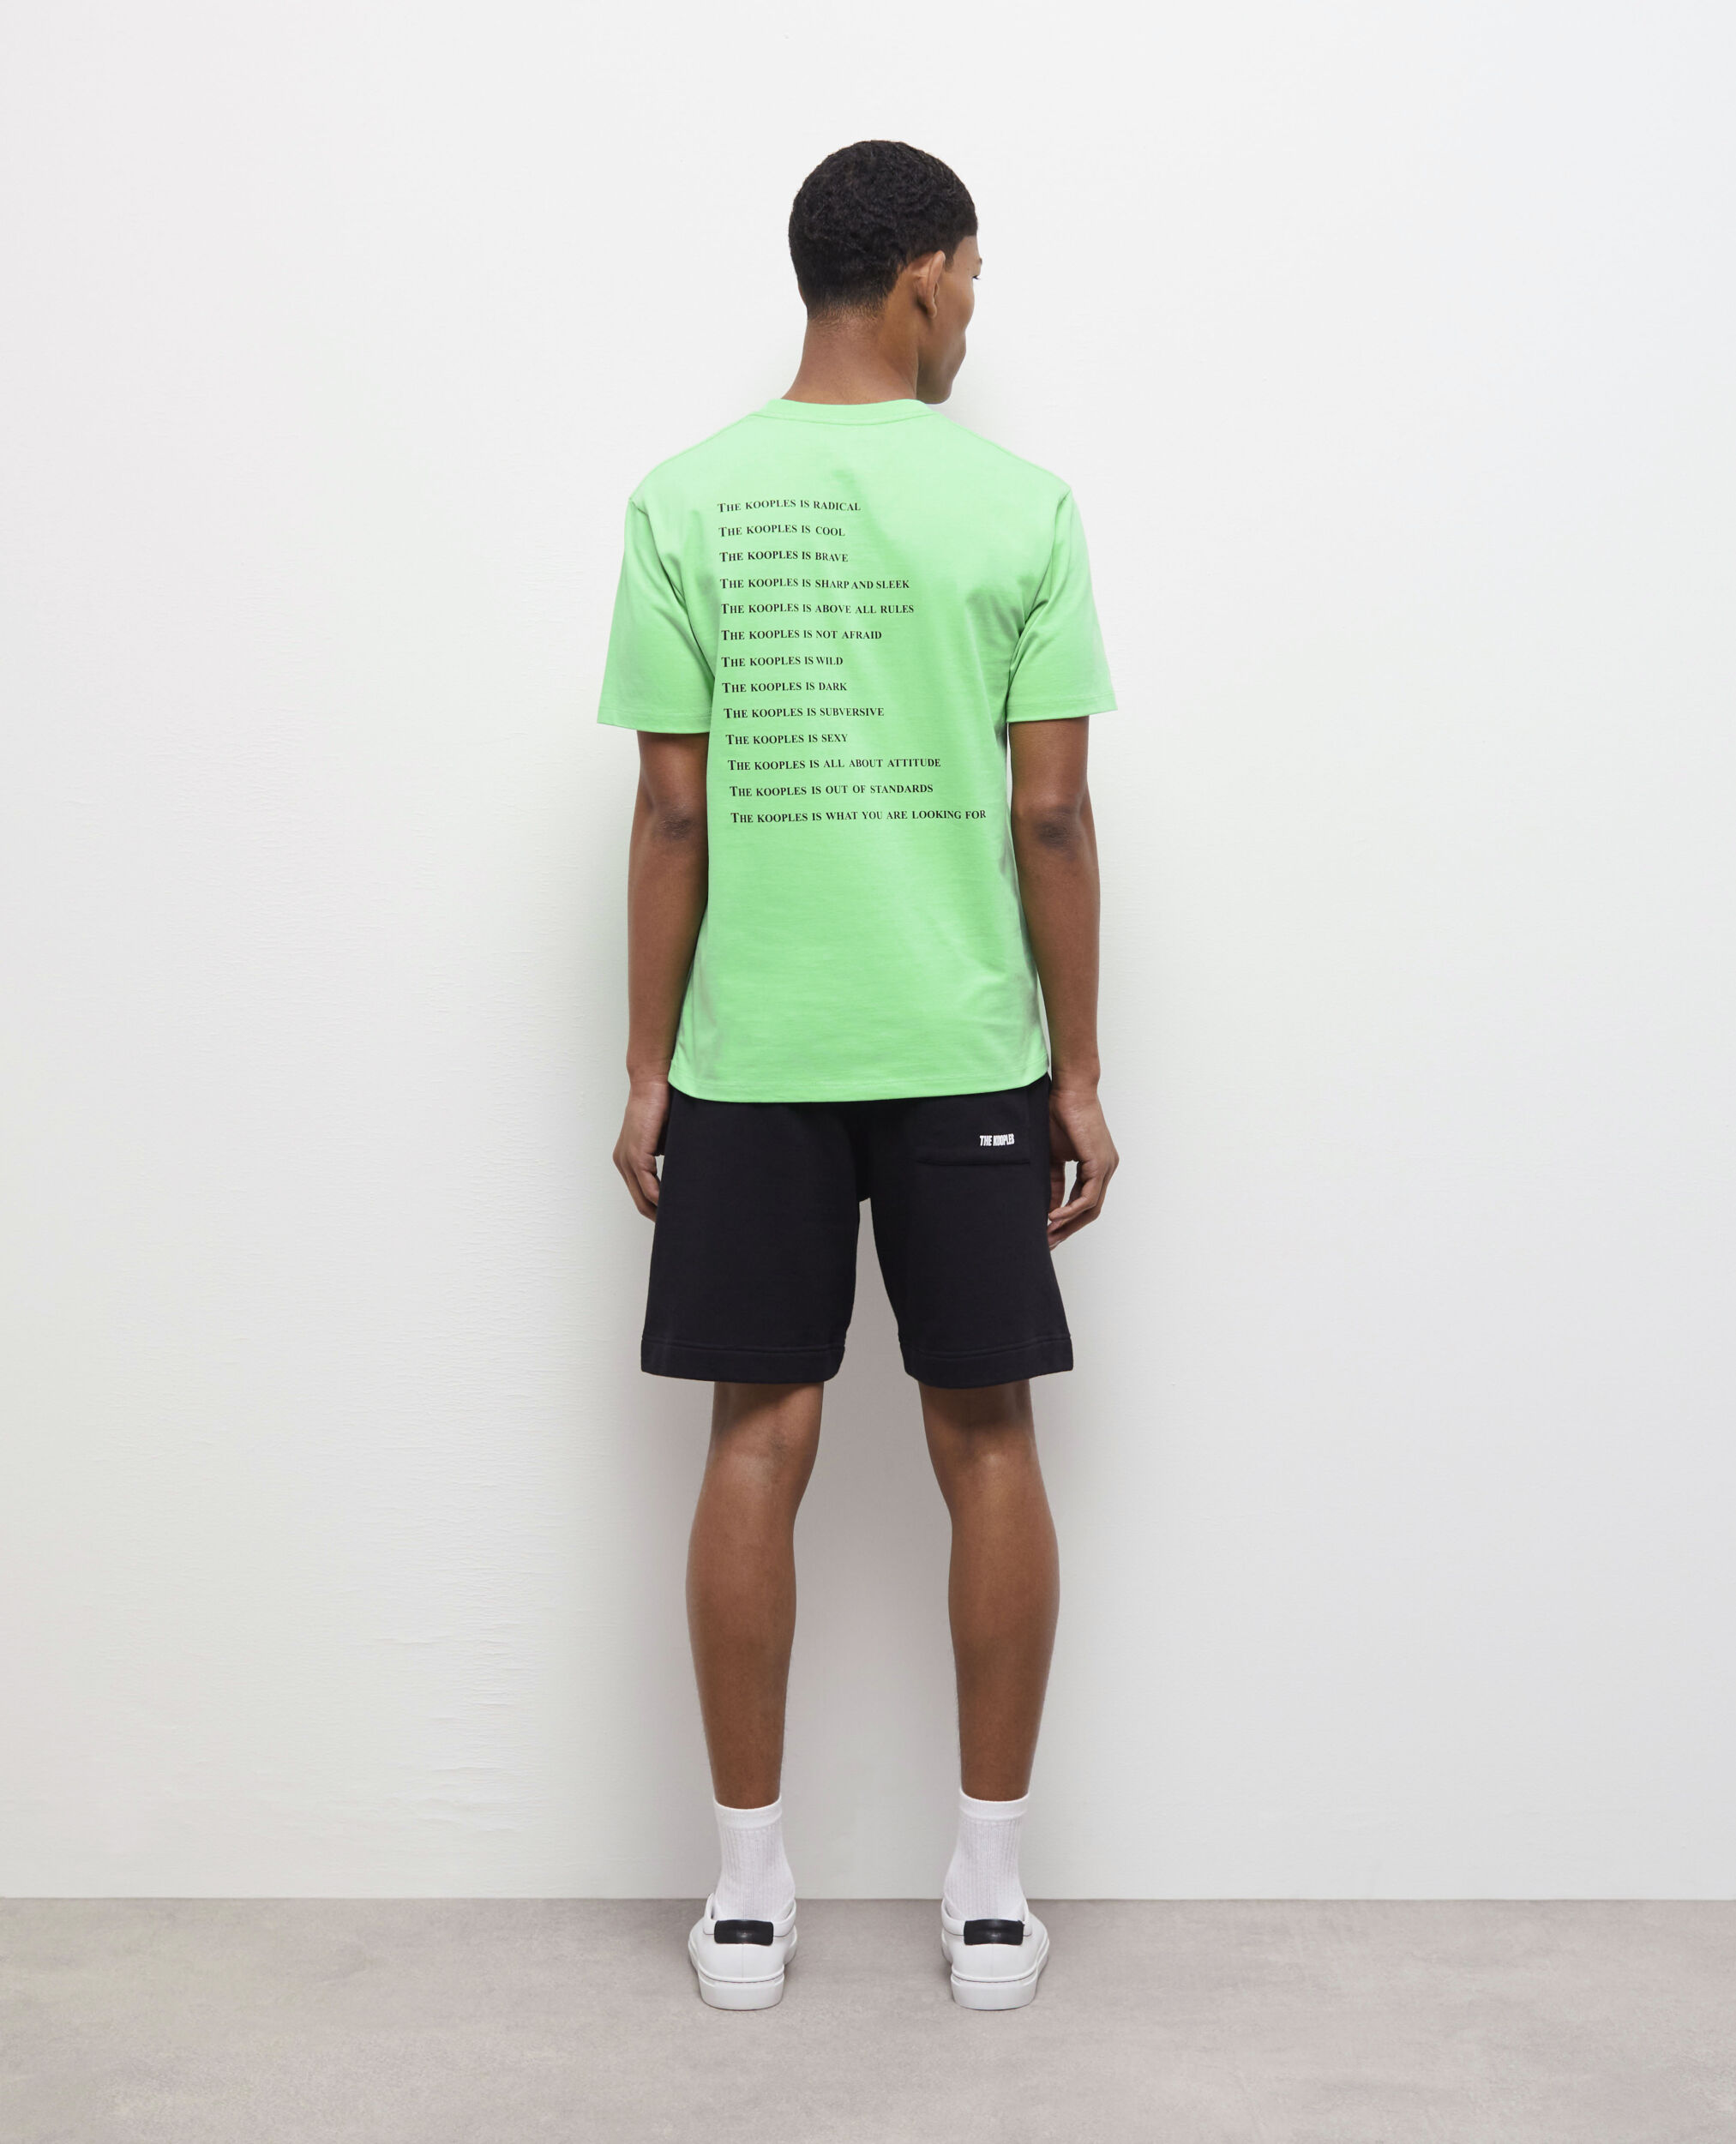 T-shirt Homme What is vert clair, APPLE, hi-res image number null